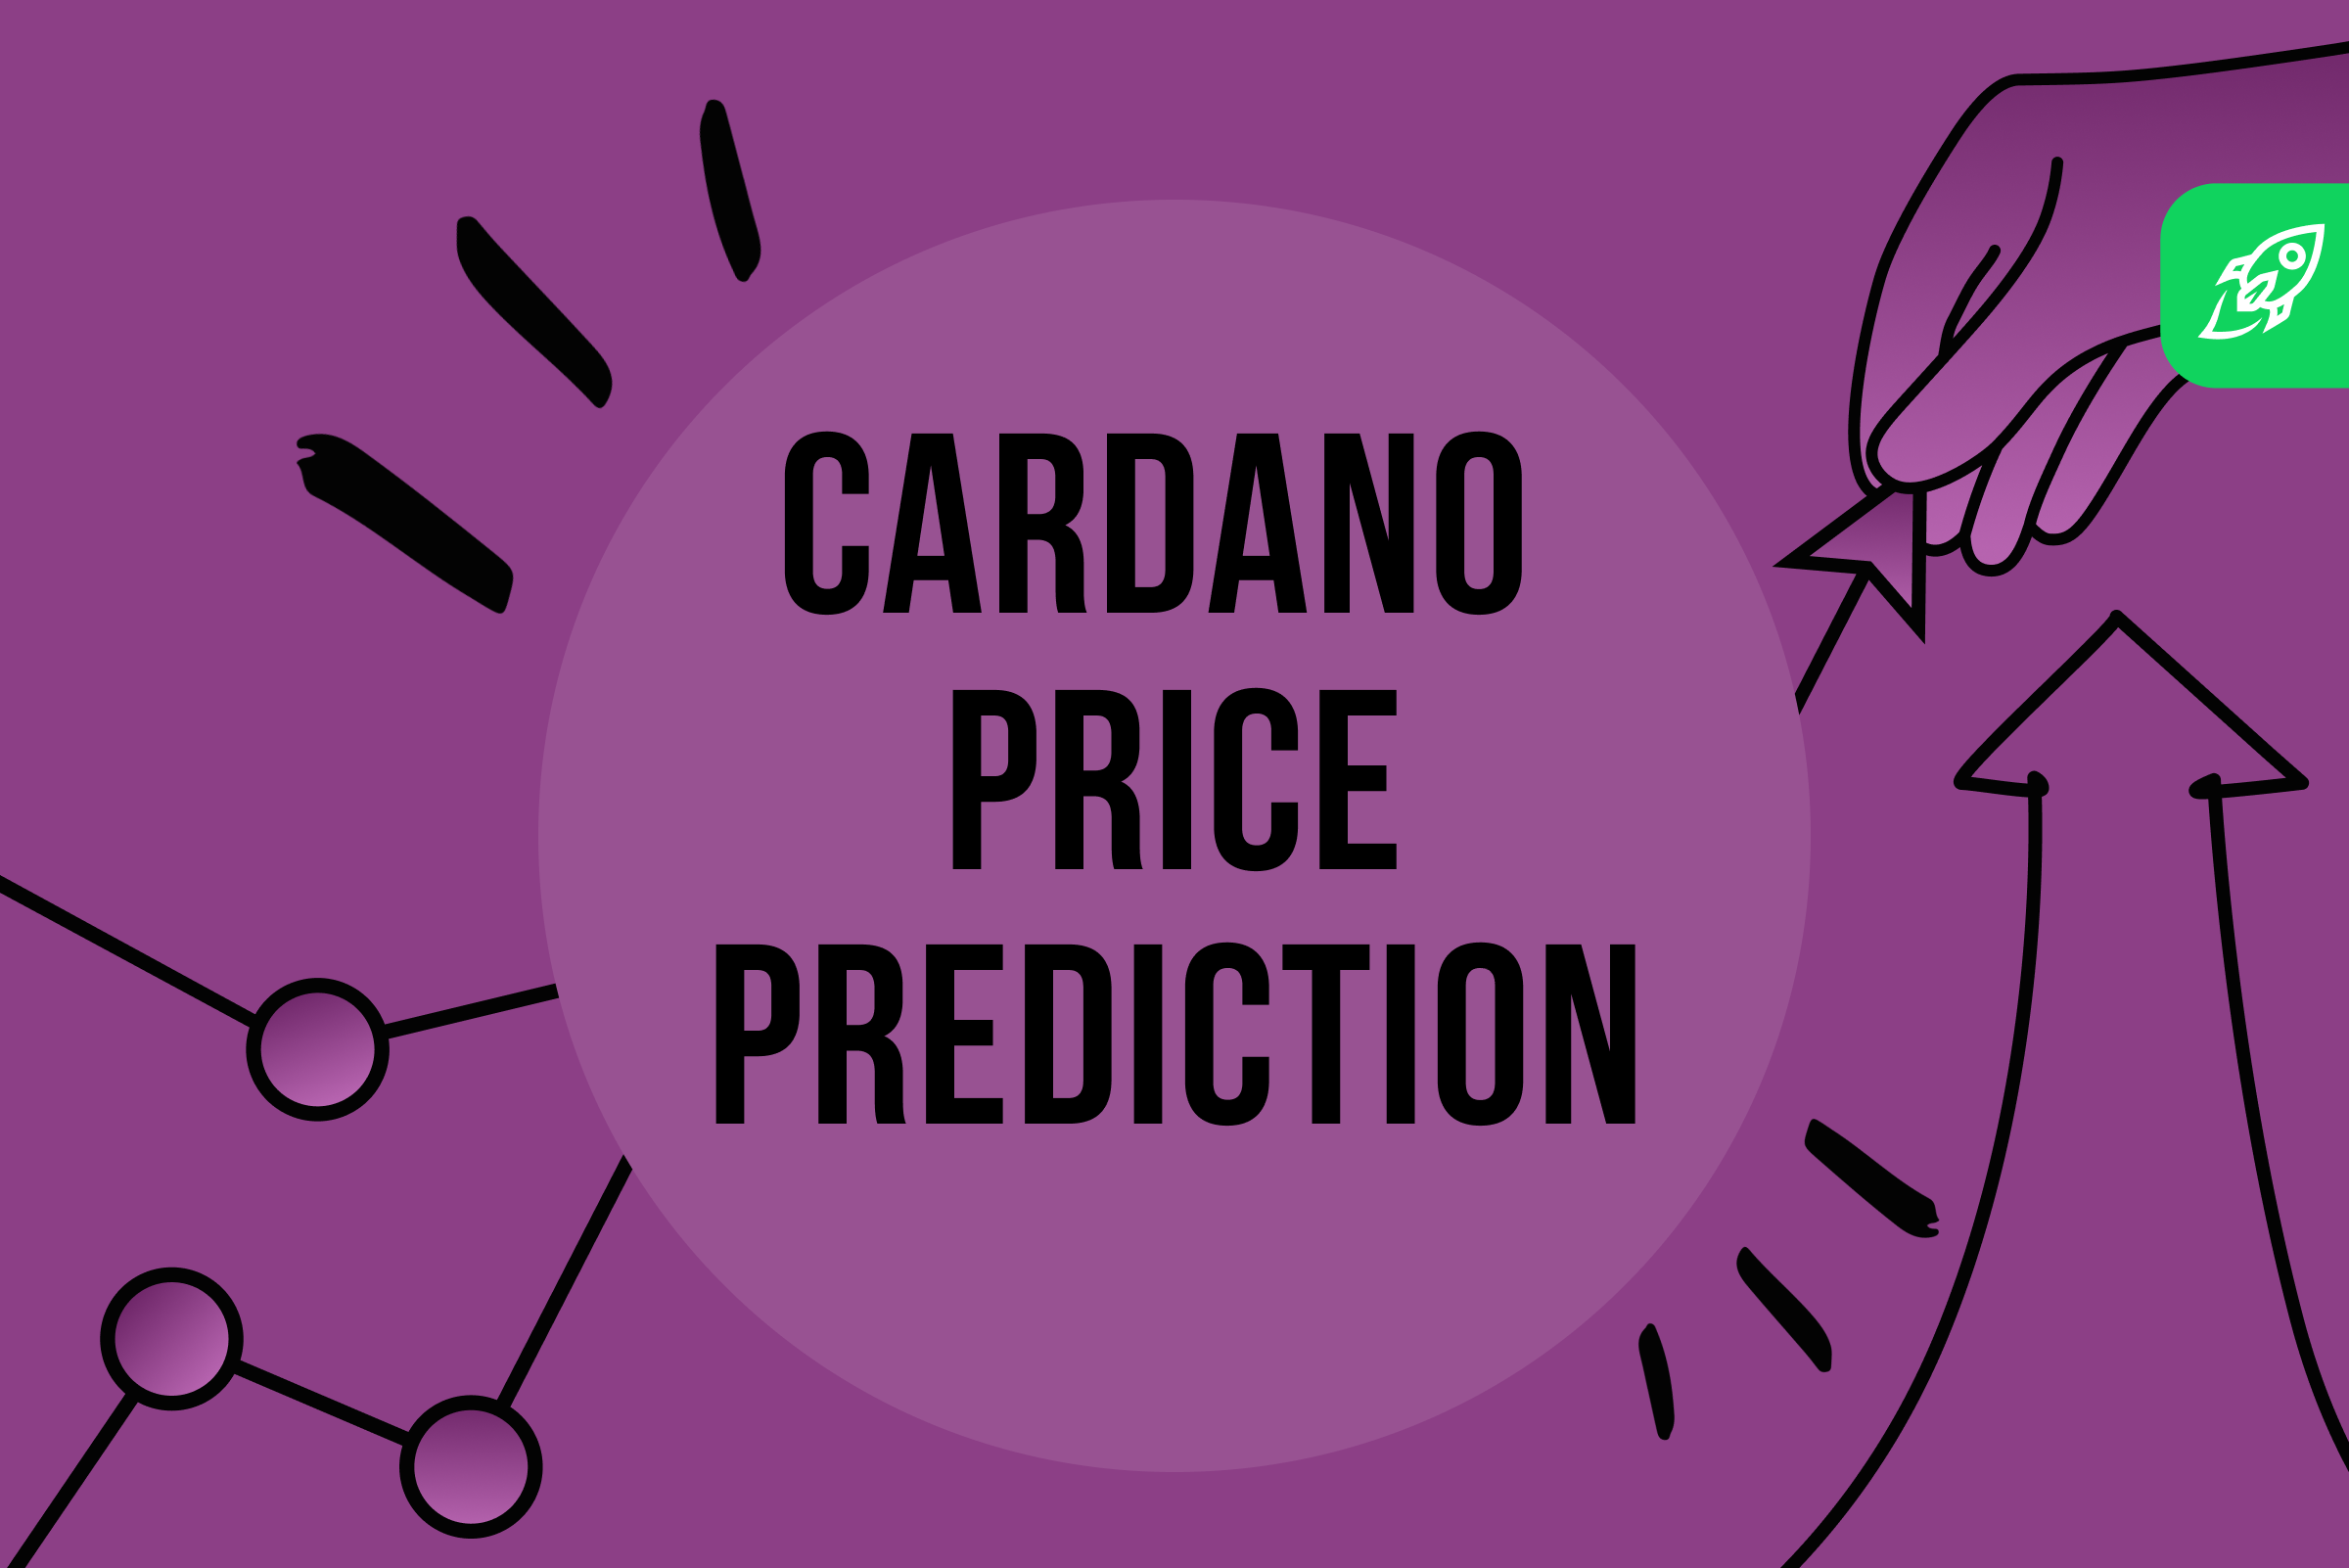 Finance experts set Cardano price for the end of 